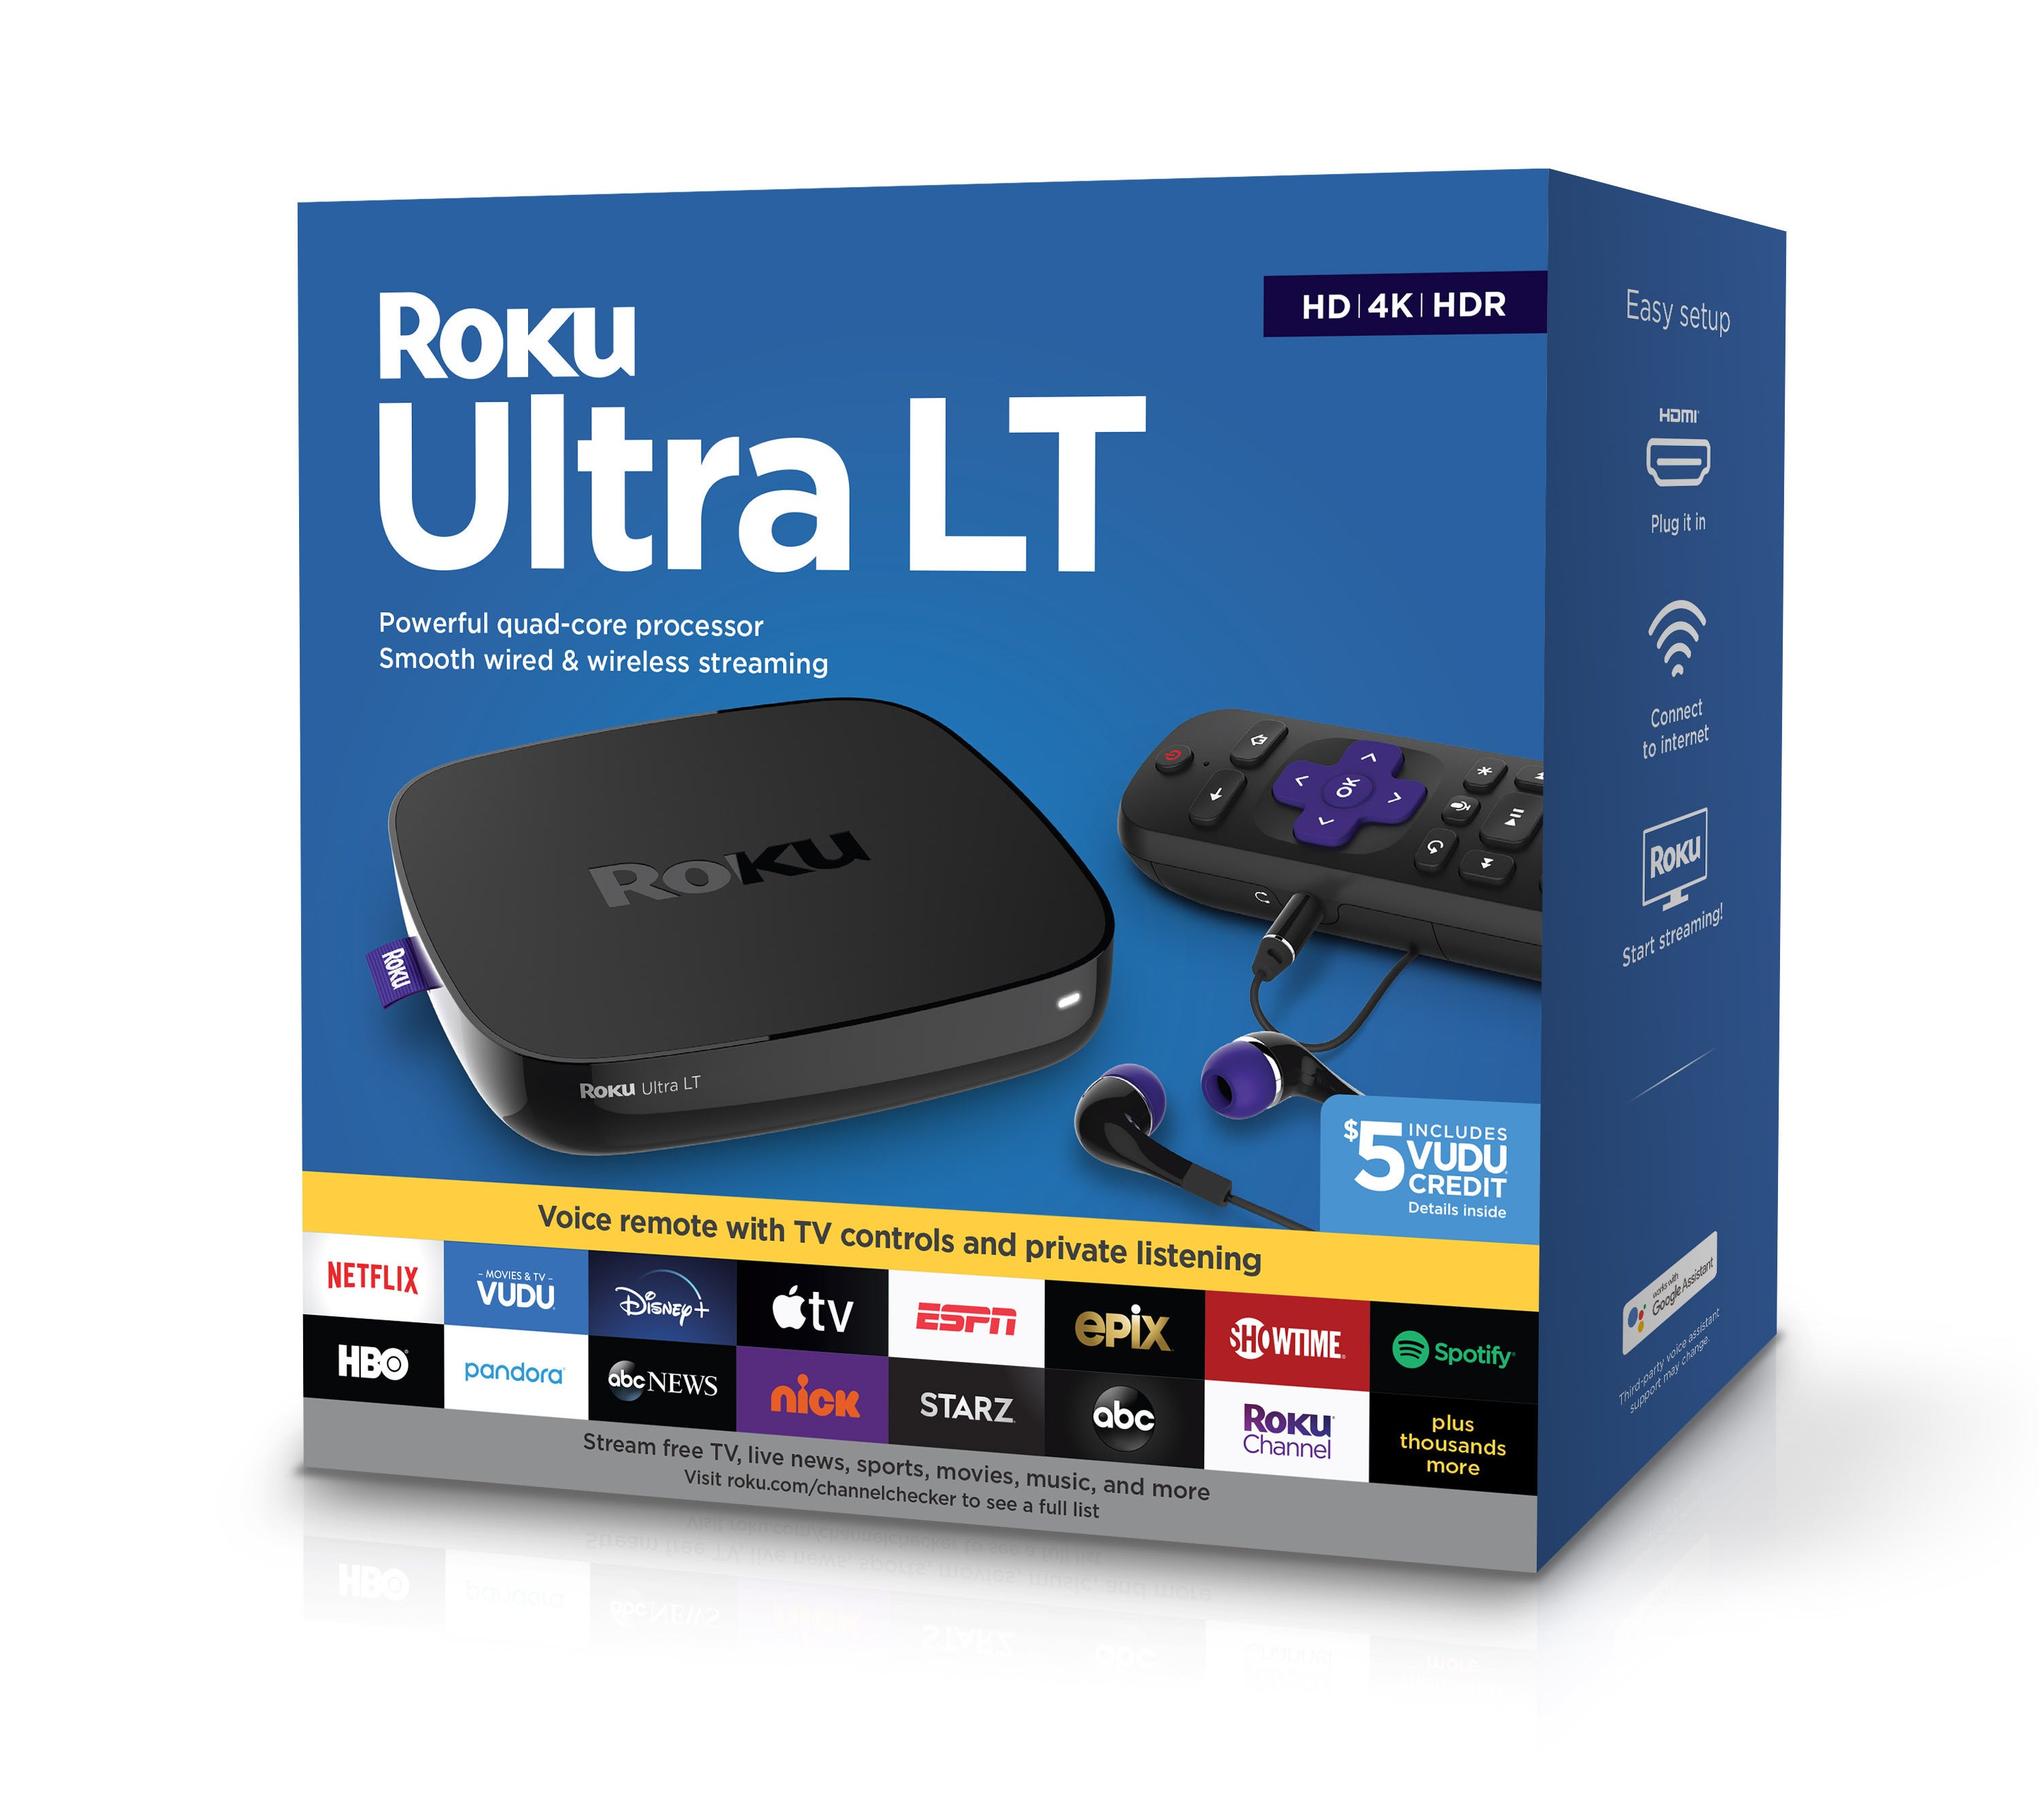 box of the roku ultra LT steaming media player